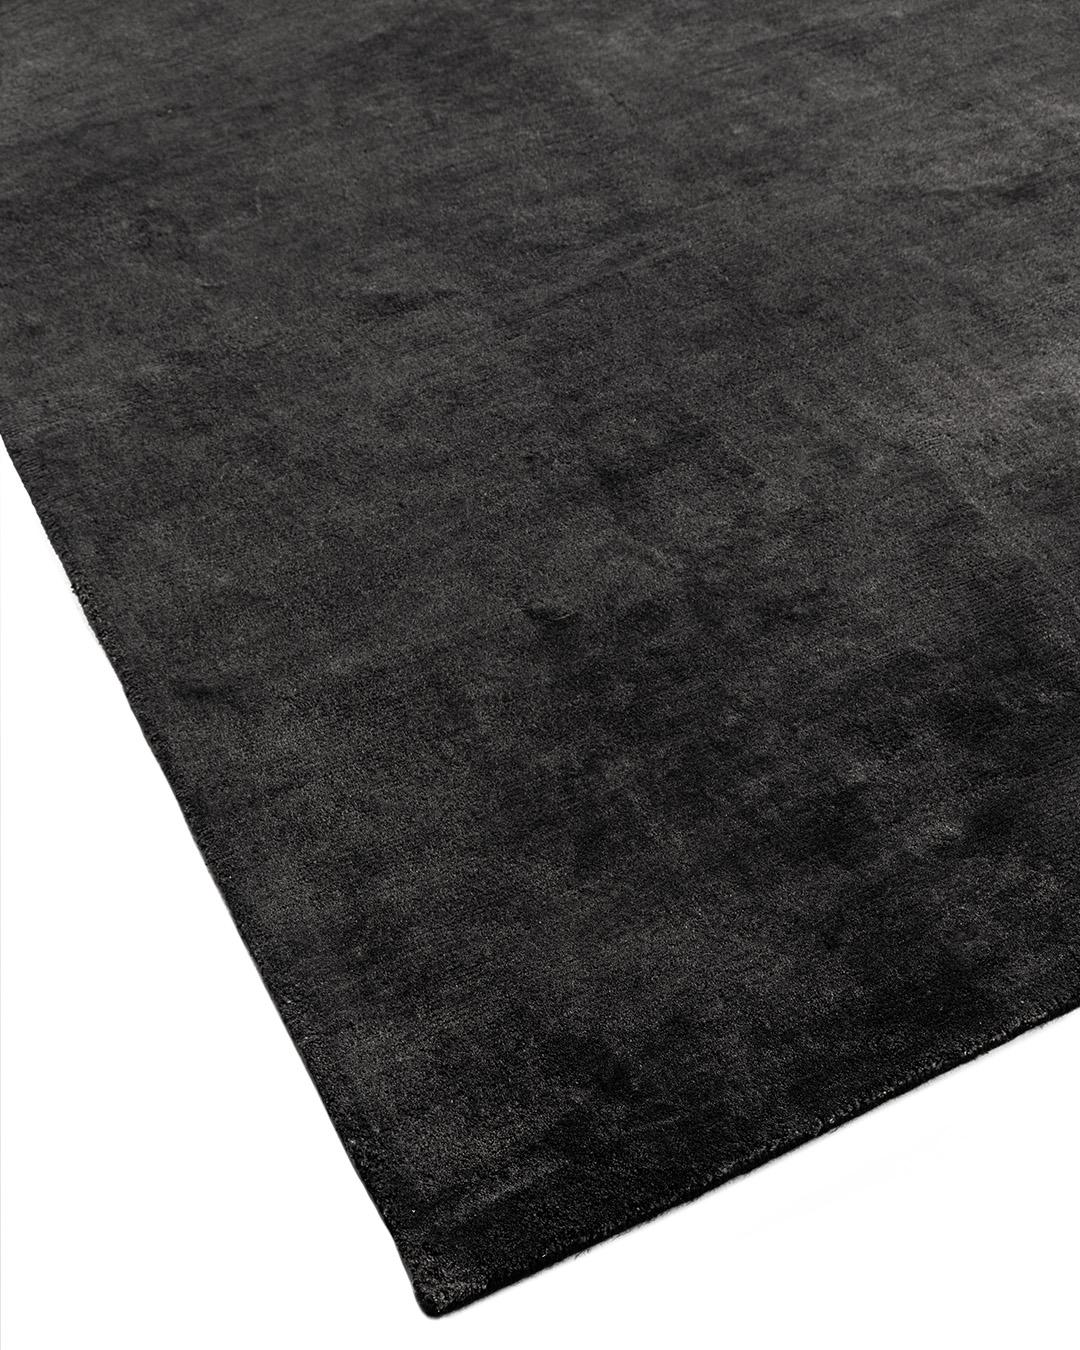 New Solid Charcoal Hand Knotted rug, measure 12' x 15'. A luxurious, lavish, simple lustrous, hand knotted linen rug, that will give an overall feel of calm good design.